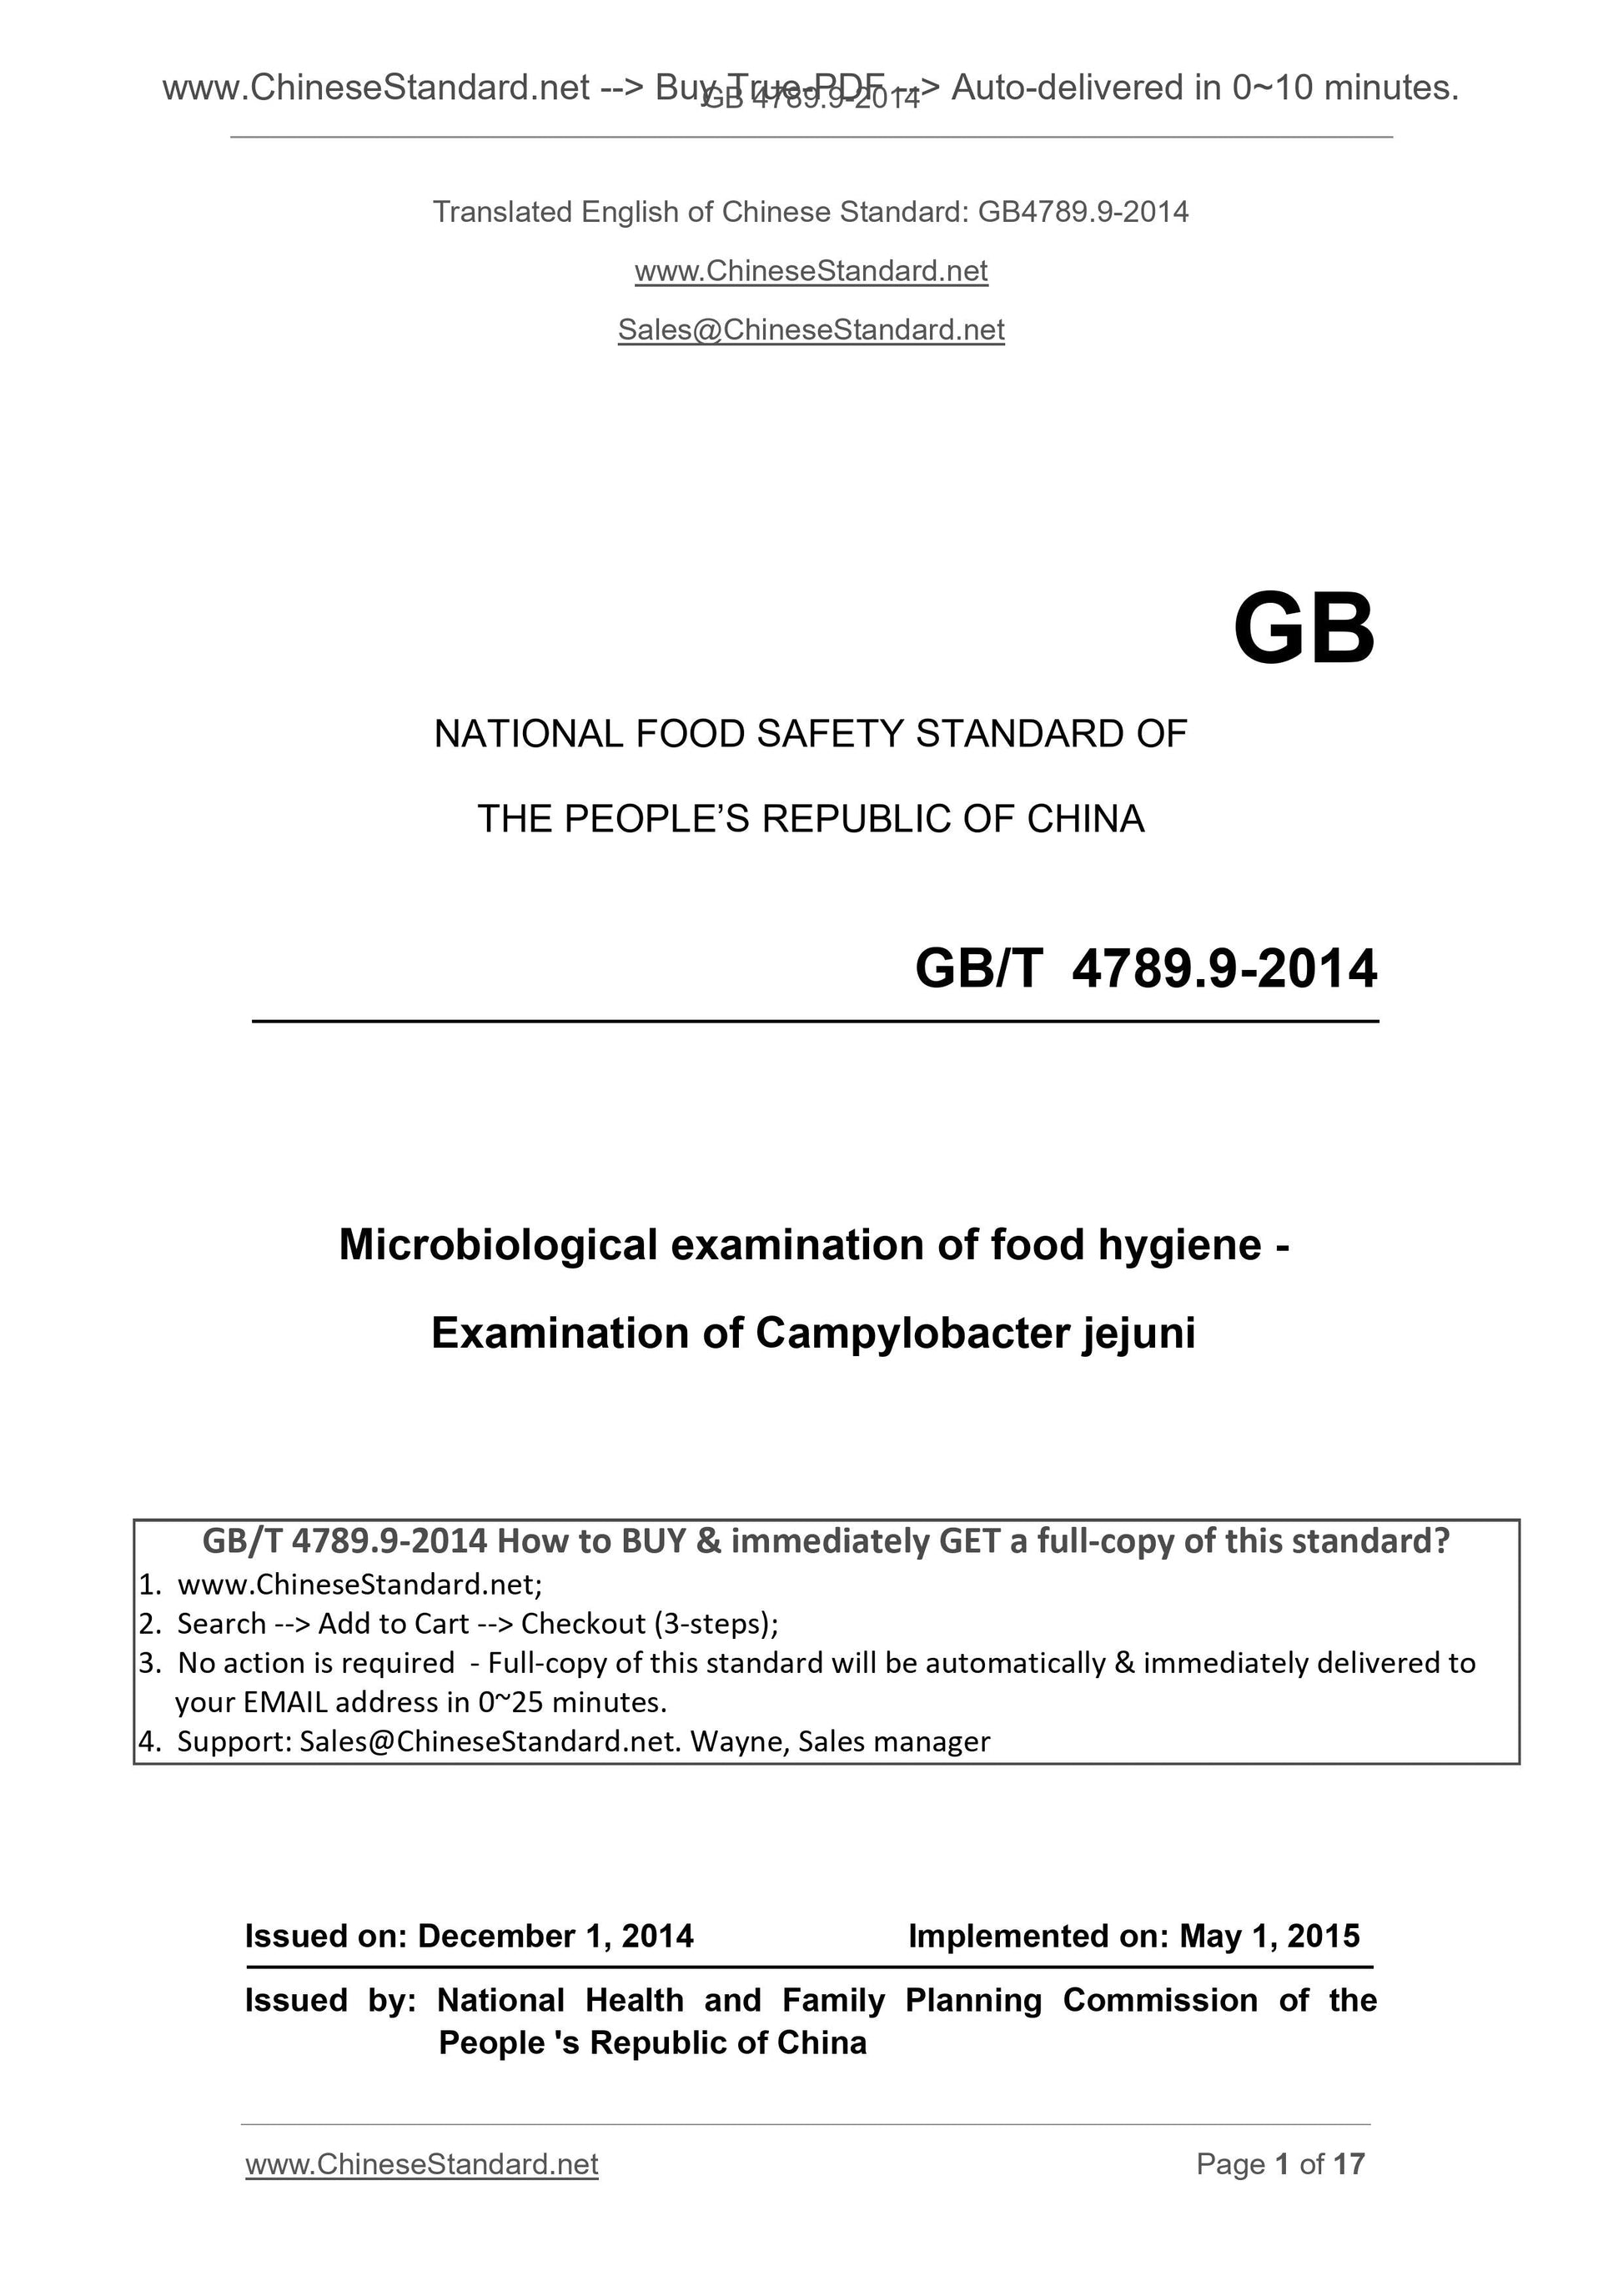 GB 4789.9-2014 Page 1